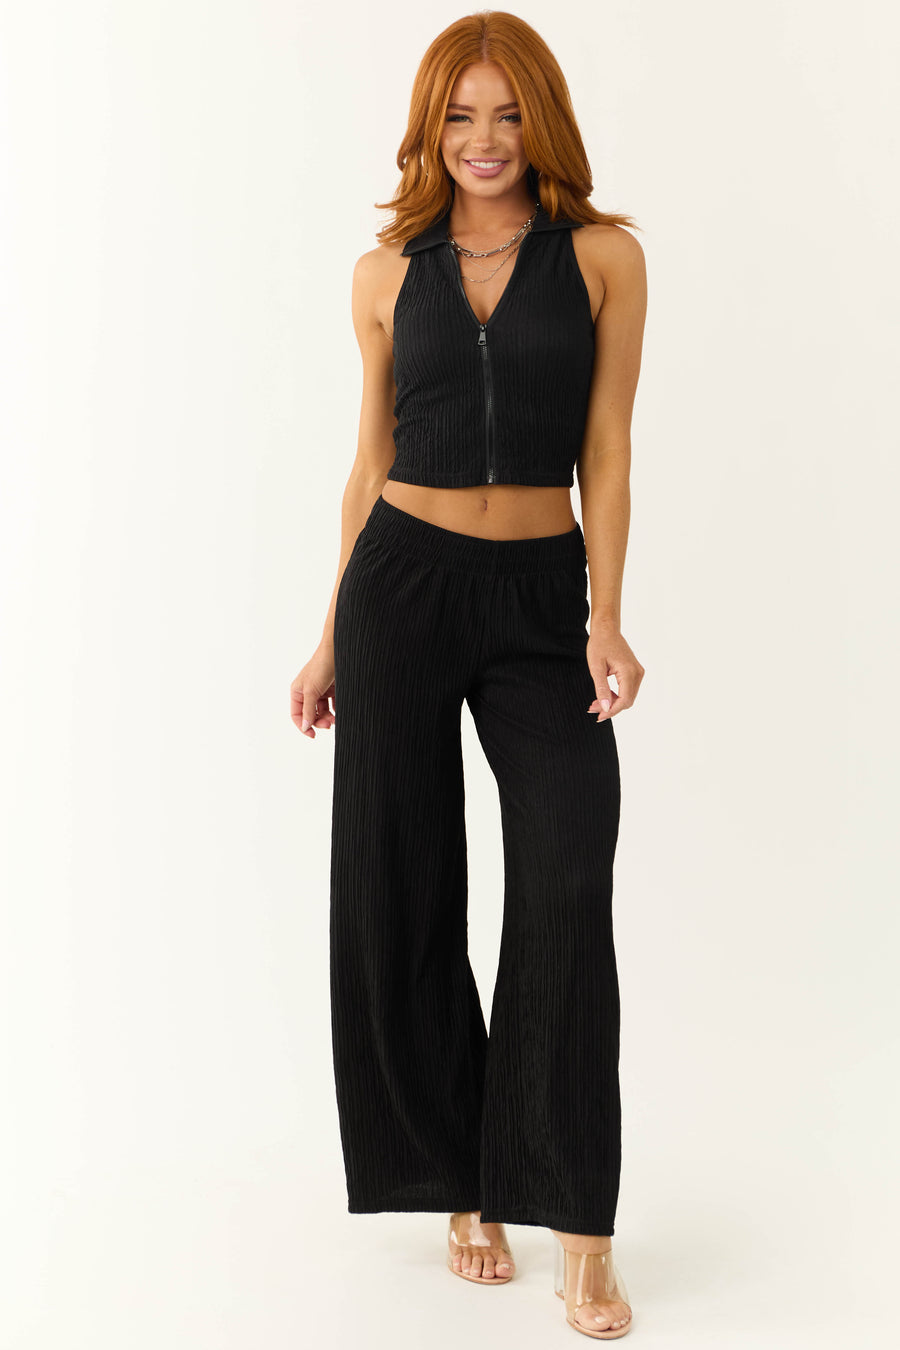 Black Plisse Collared Top and Pants Set